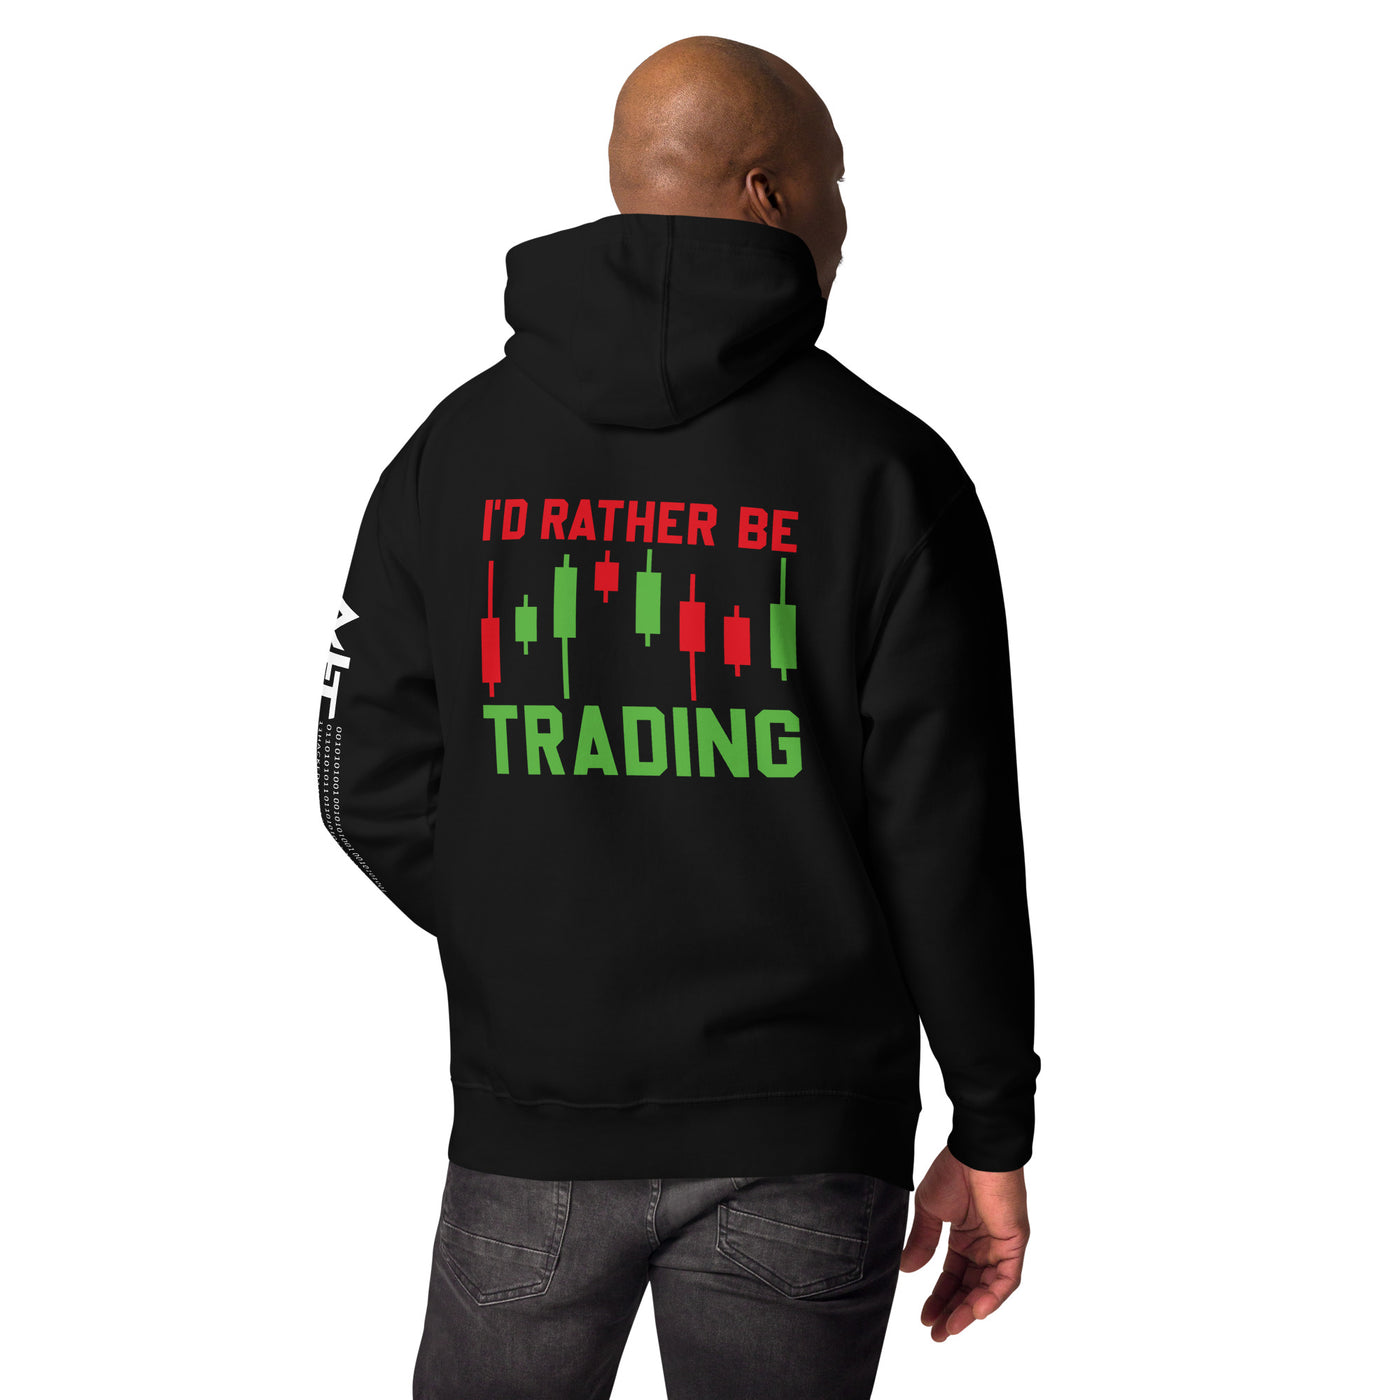 I'd rater be Trading ( Tanvir ) - Unisex Hoodie ( Back Print )